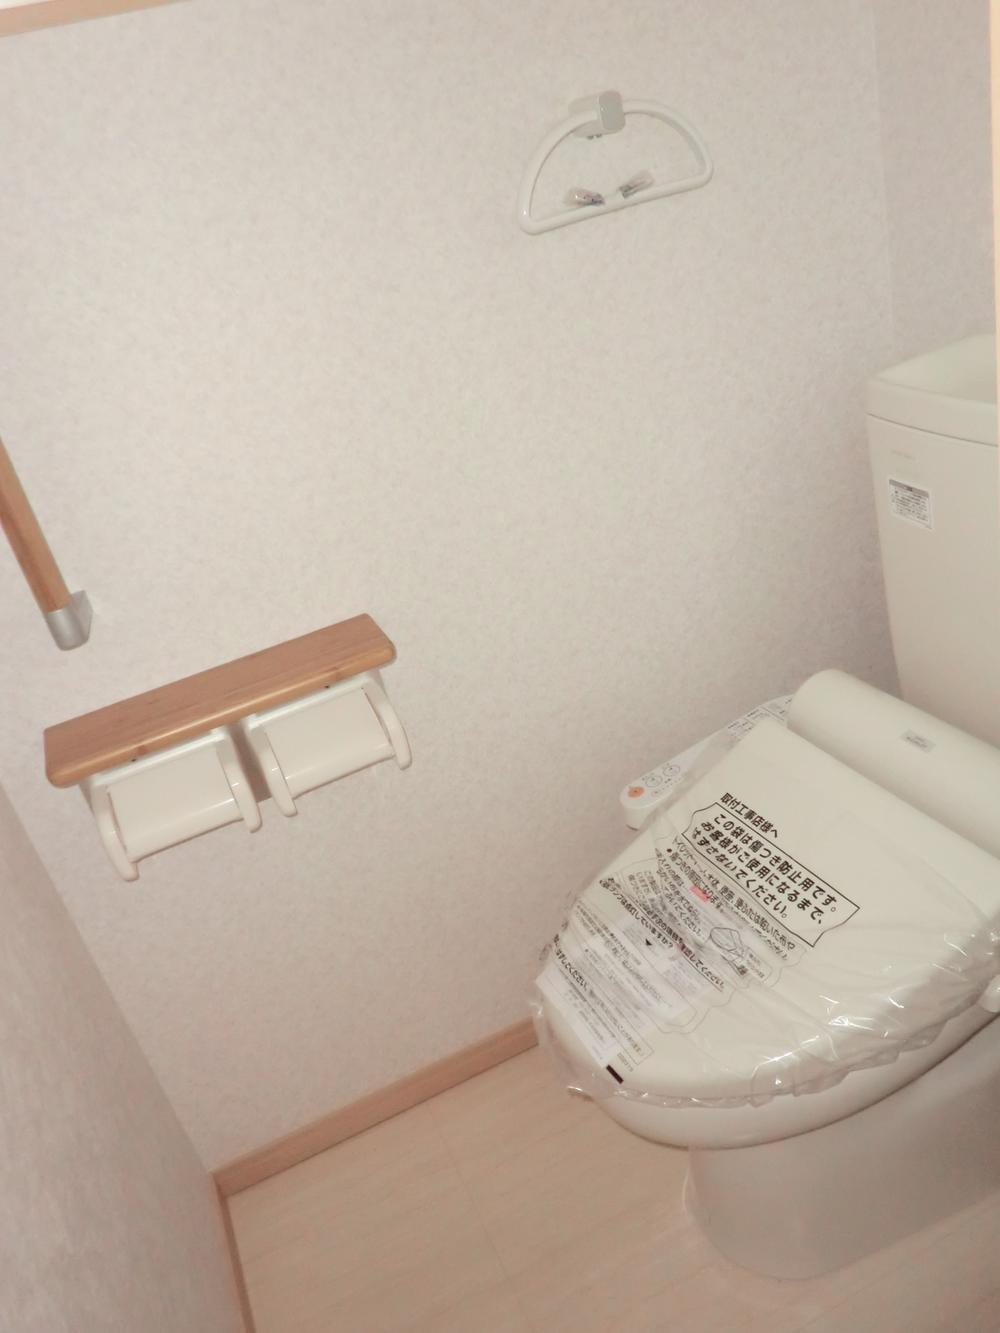 Other Equipment. comfortable, Energy saving, Washlet of cleaning Ease specification!